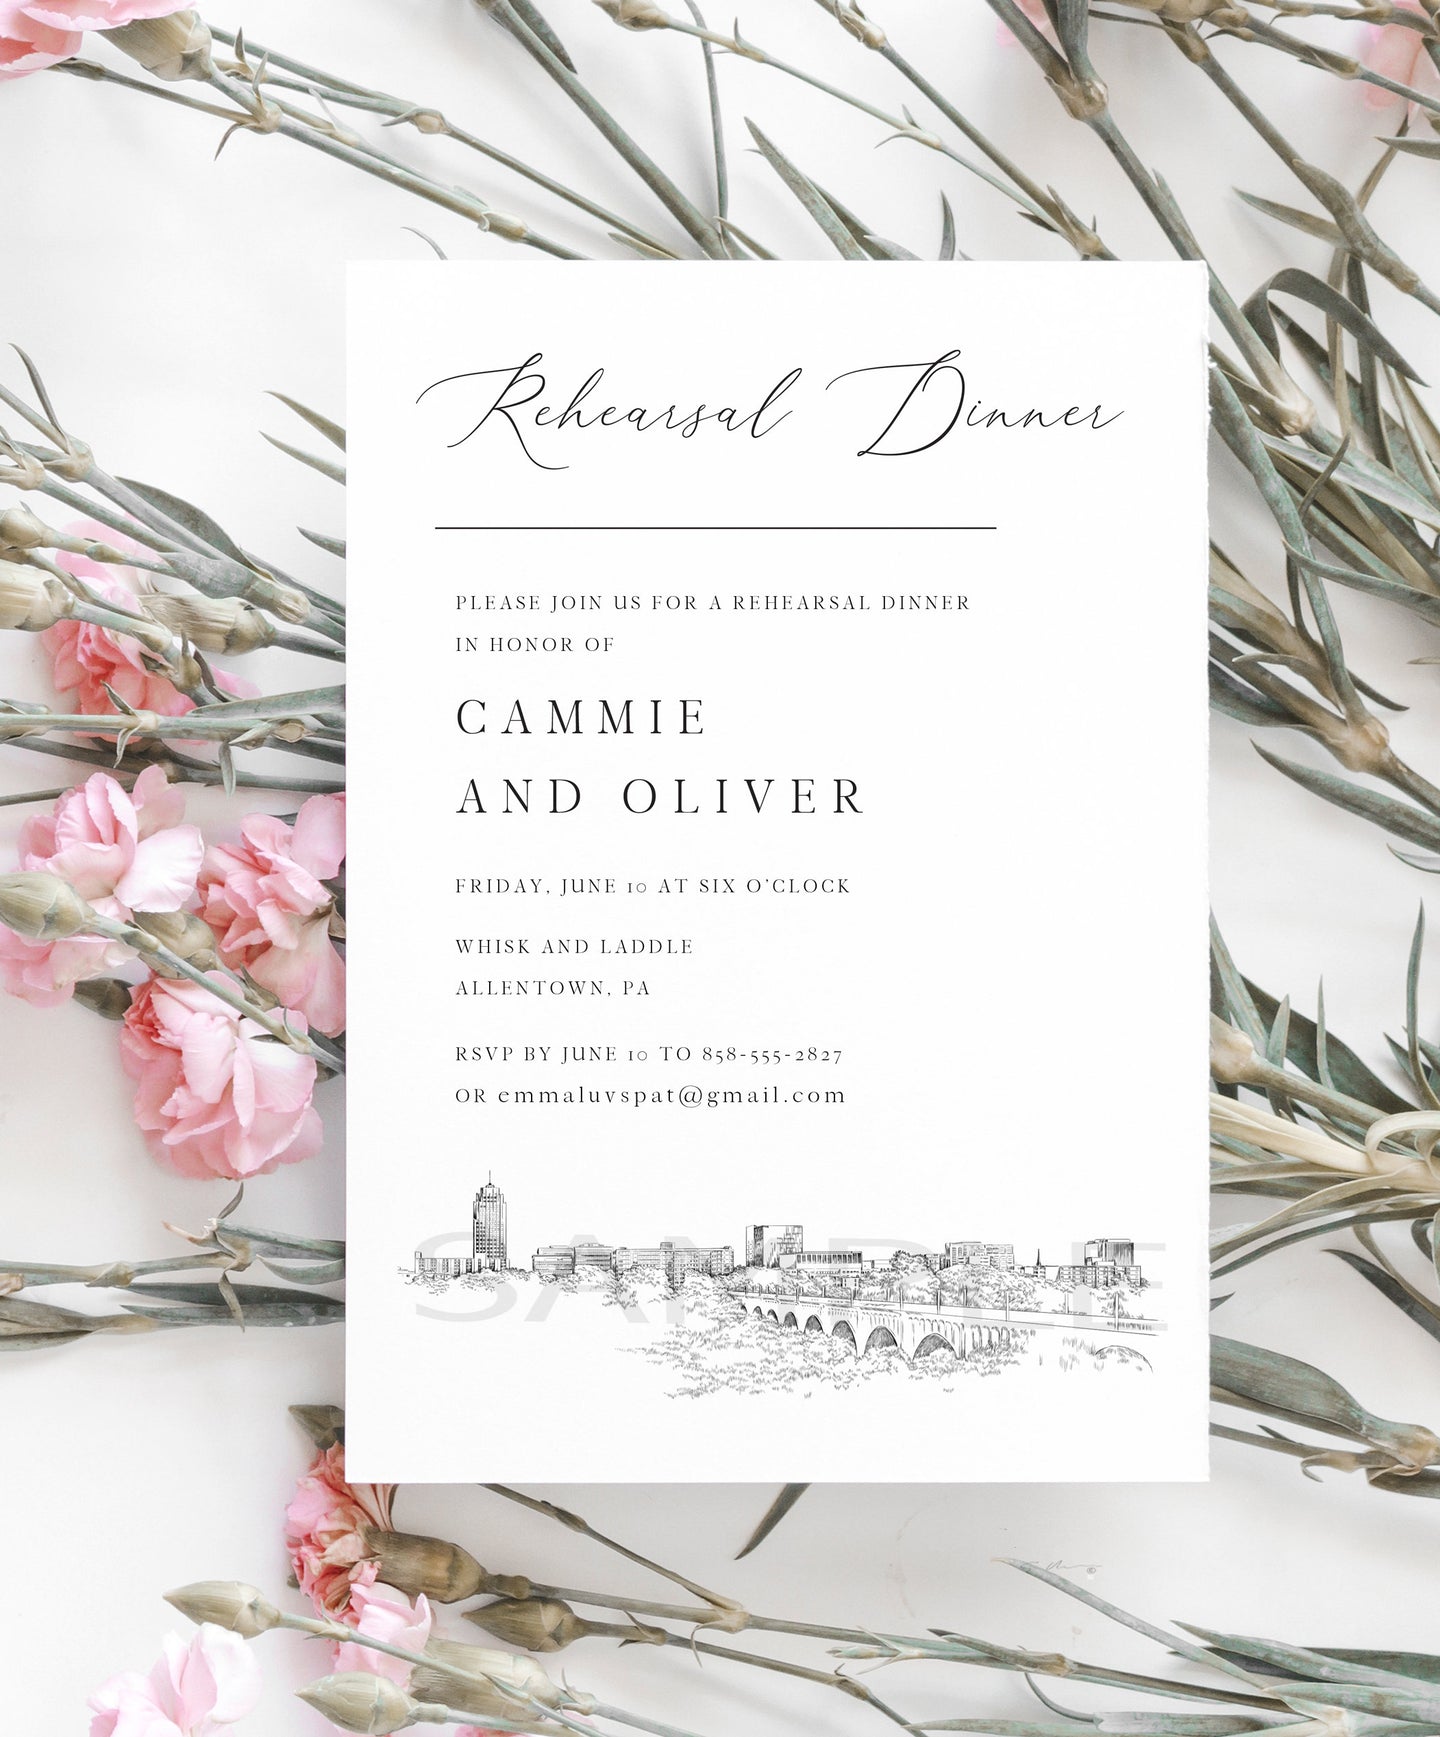 Rehearsal Dinner Invitations Allentown, PA, Pennsylvania, wedding, pa wedding, Weddings, Rehearse, Invite (set of 25 cards)